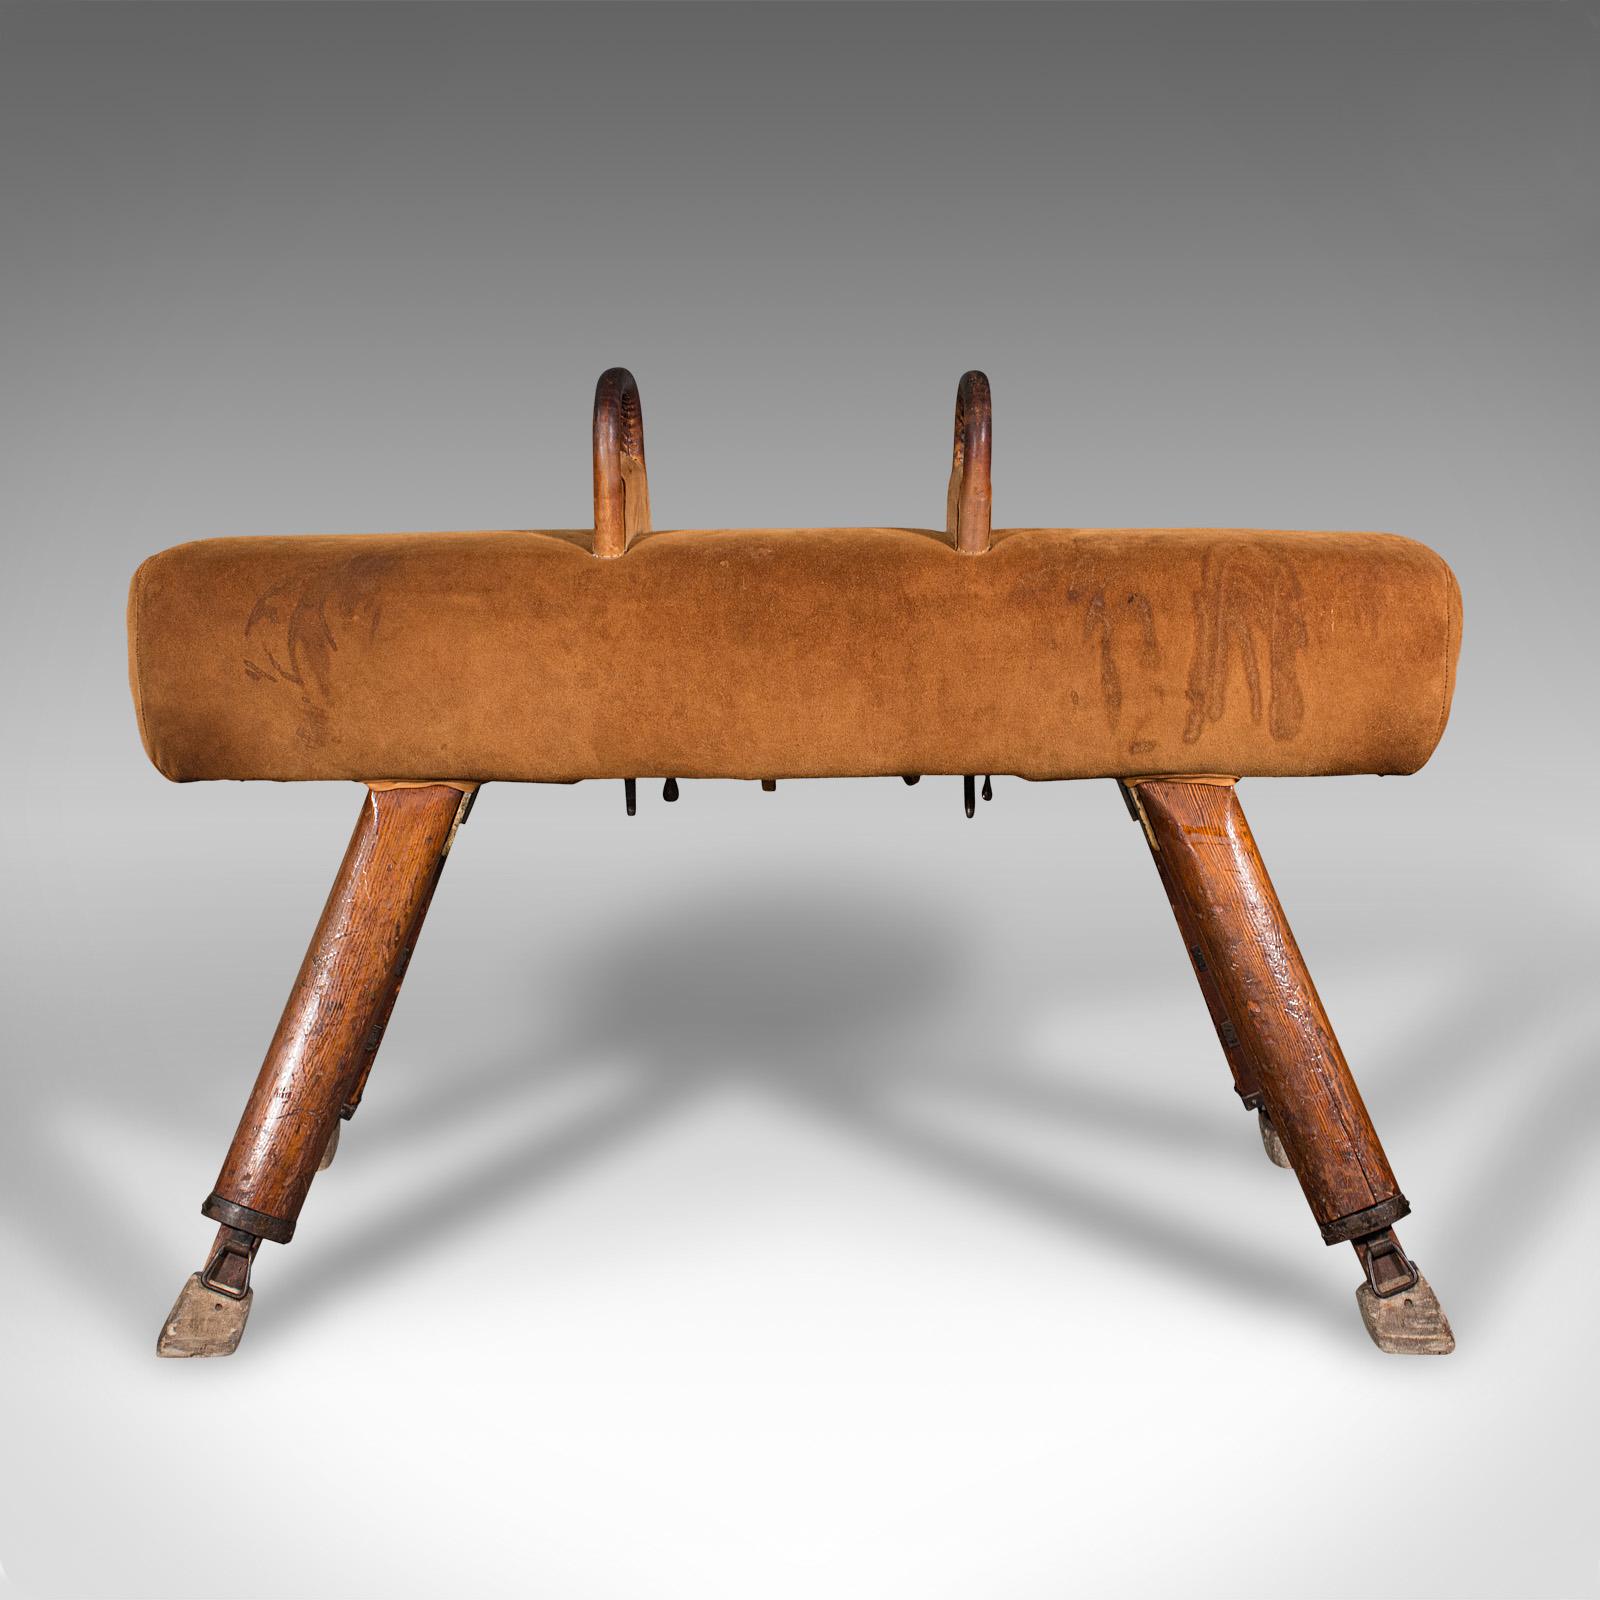 This is a vintage pommel horse. An English, suede and pine gymnasium vaulting apparatus, dating to the early 20th century, circa 1930.

Delightfully solid horse as good to use today as it was 90 years ago
Displays a desirable aged patina with